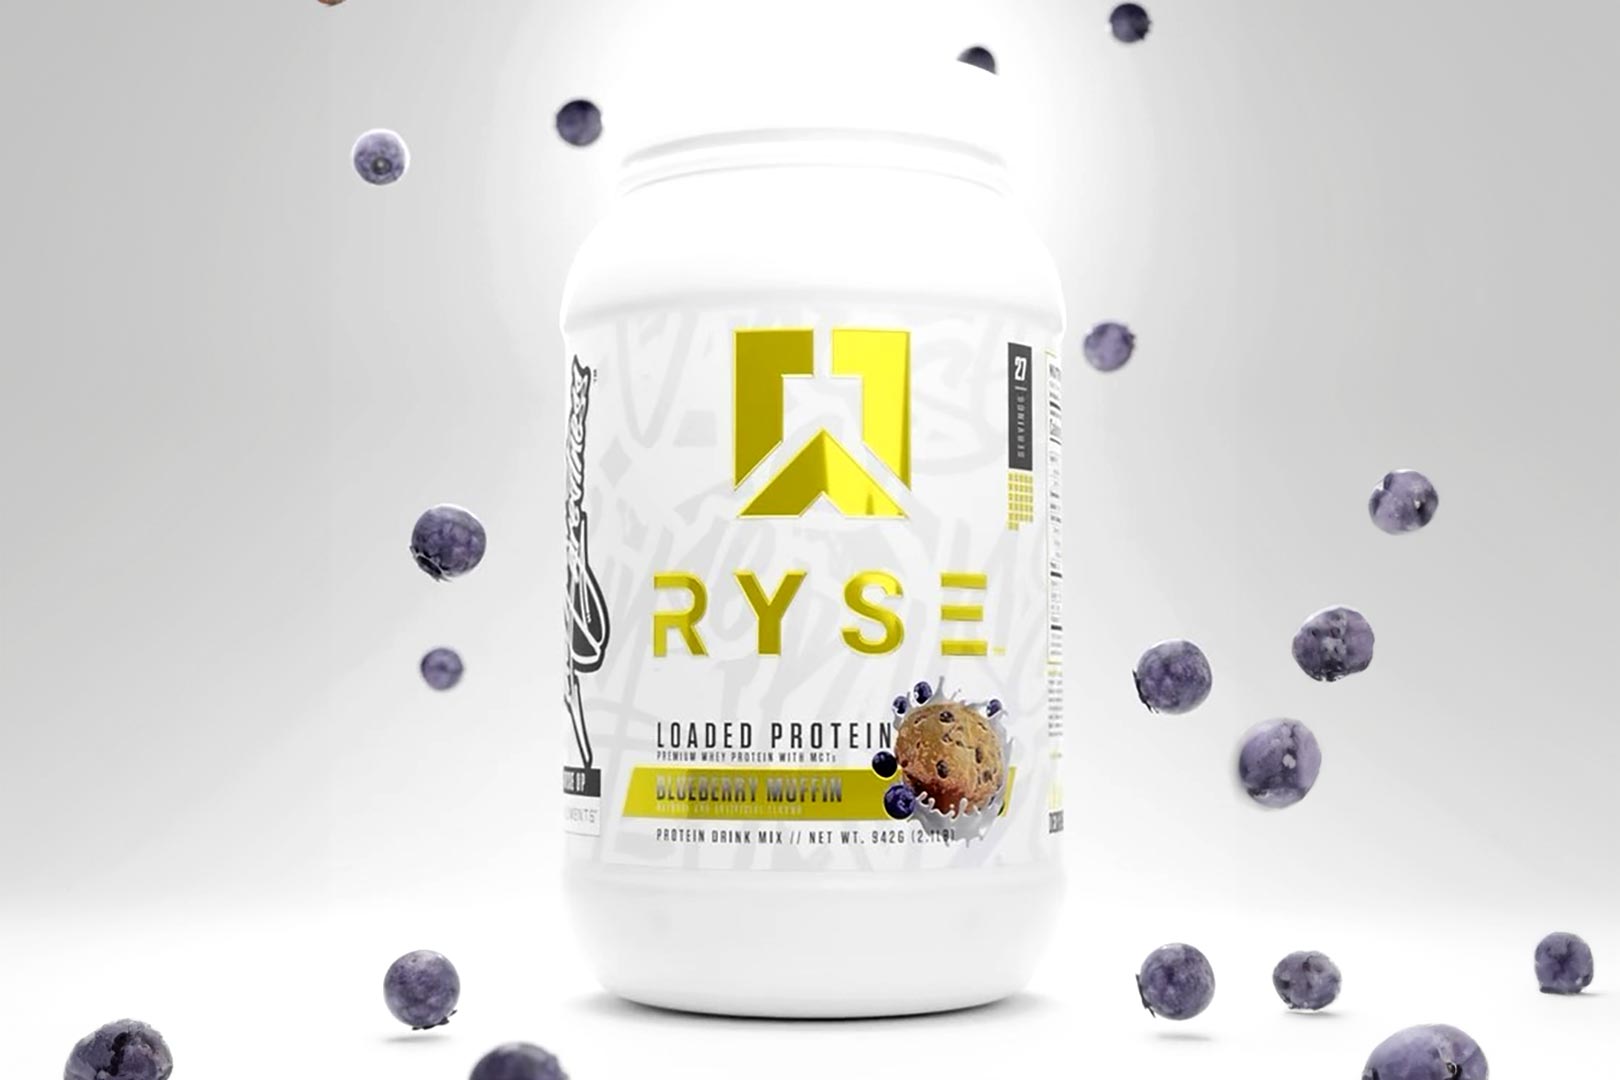 RYSE LOADED PROTEIN Peanut Butter Cup 27SVG - Athletes Nutrition